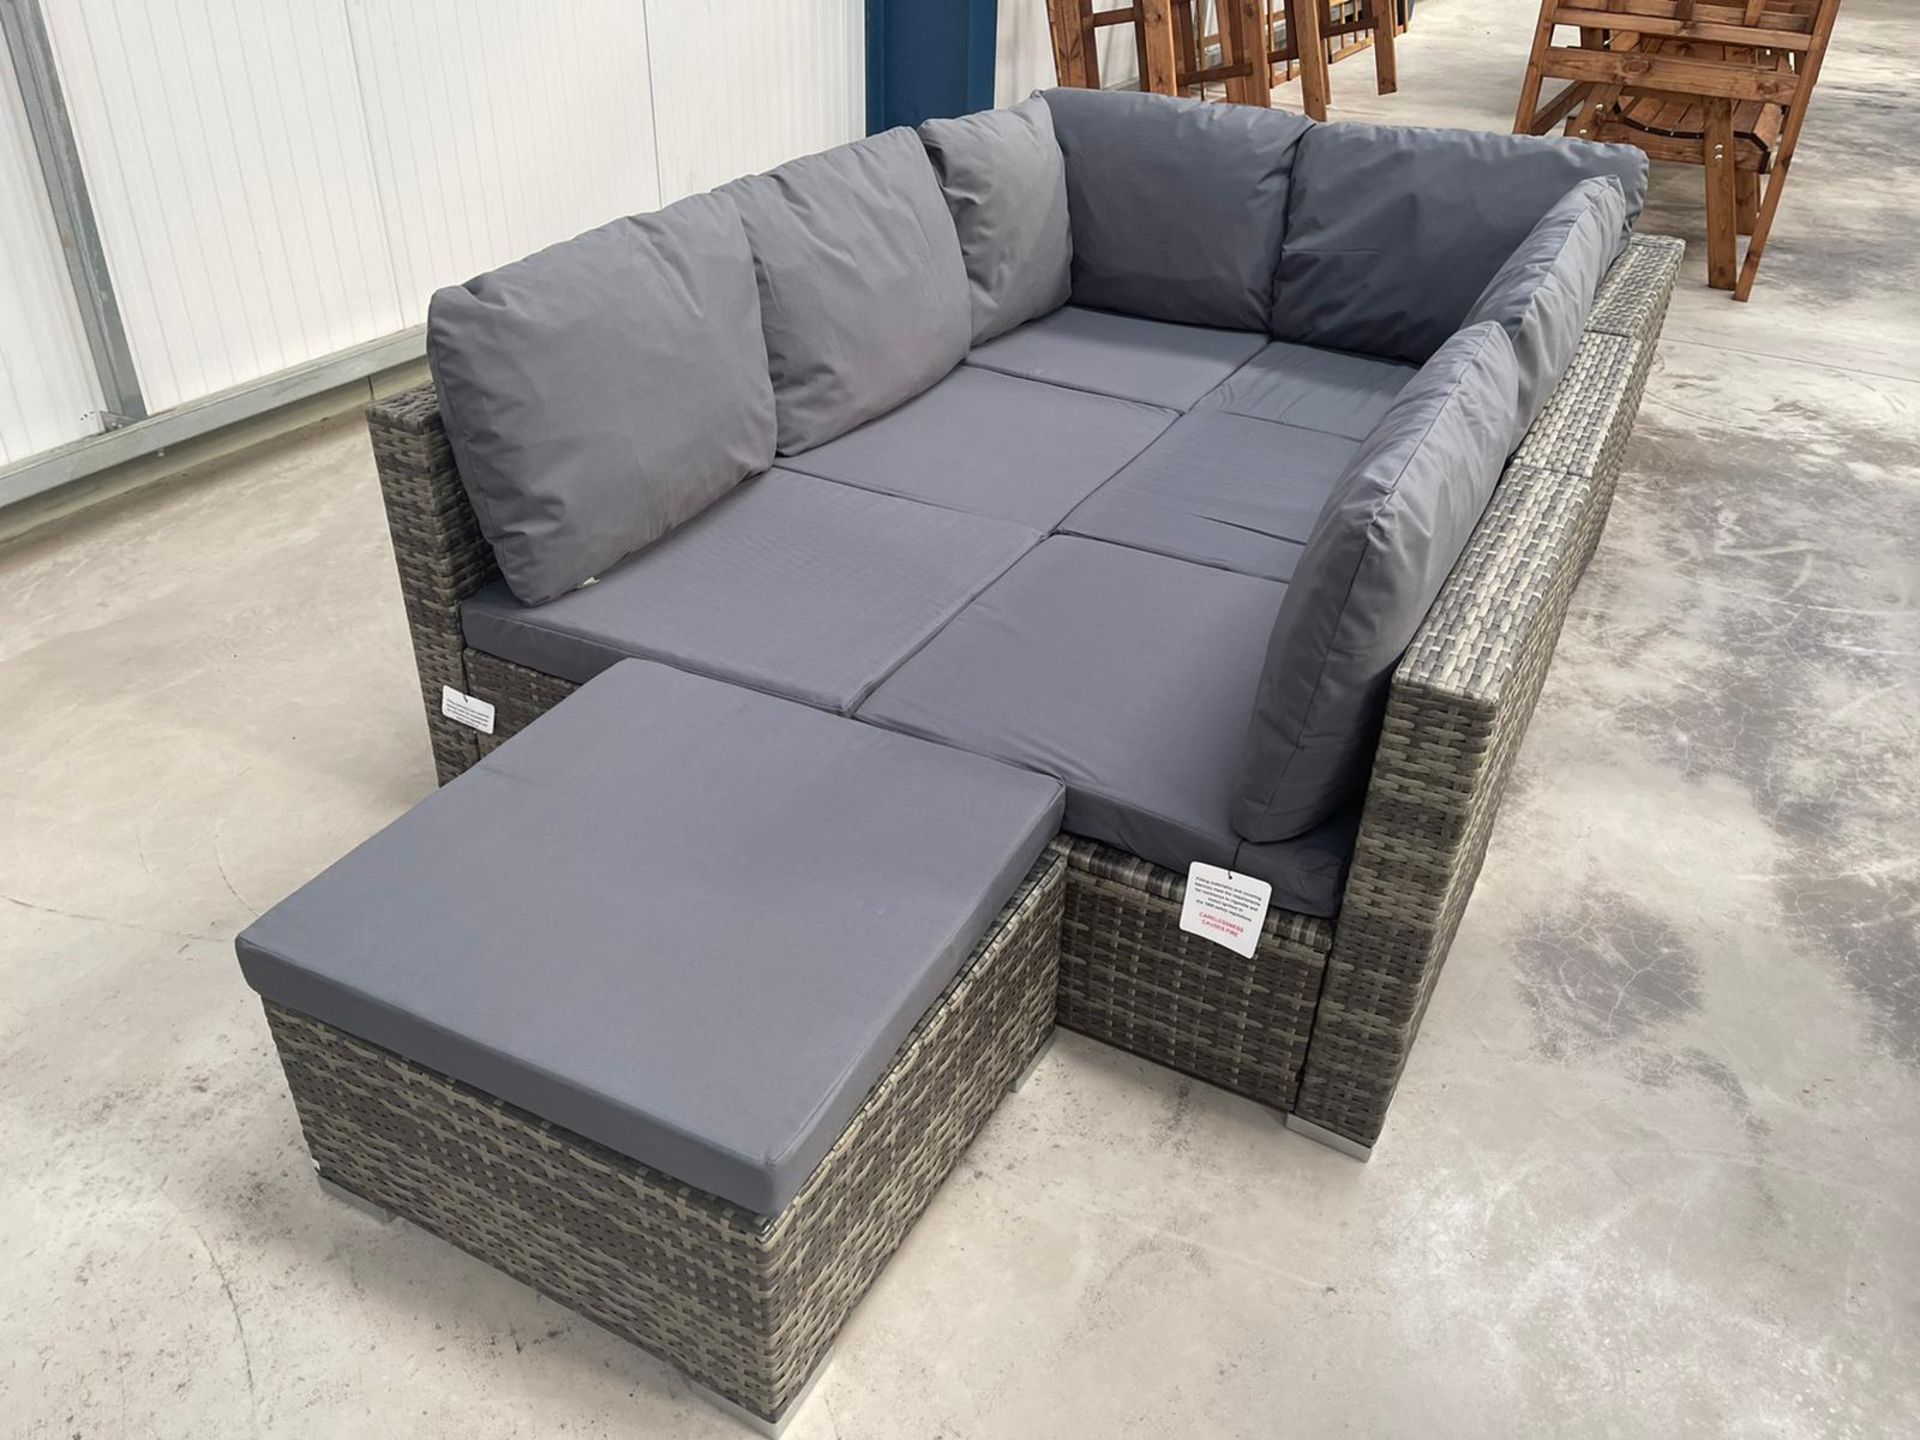 RRP £899 - NEW GREY U-SHAPED MODULAR SOFA WITH GLASS TOPPED COFFEE TABLE. VERY VERSITILE SET THAT - Image 5 of 9